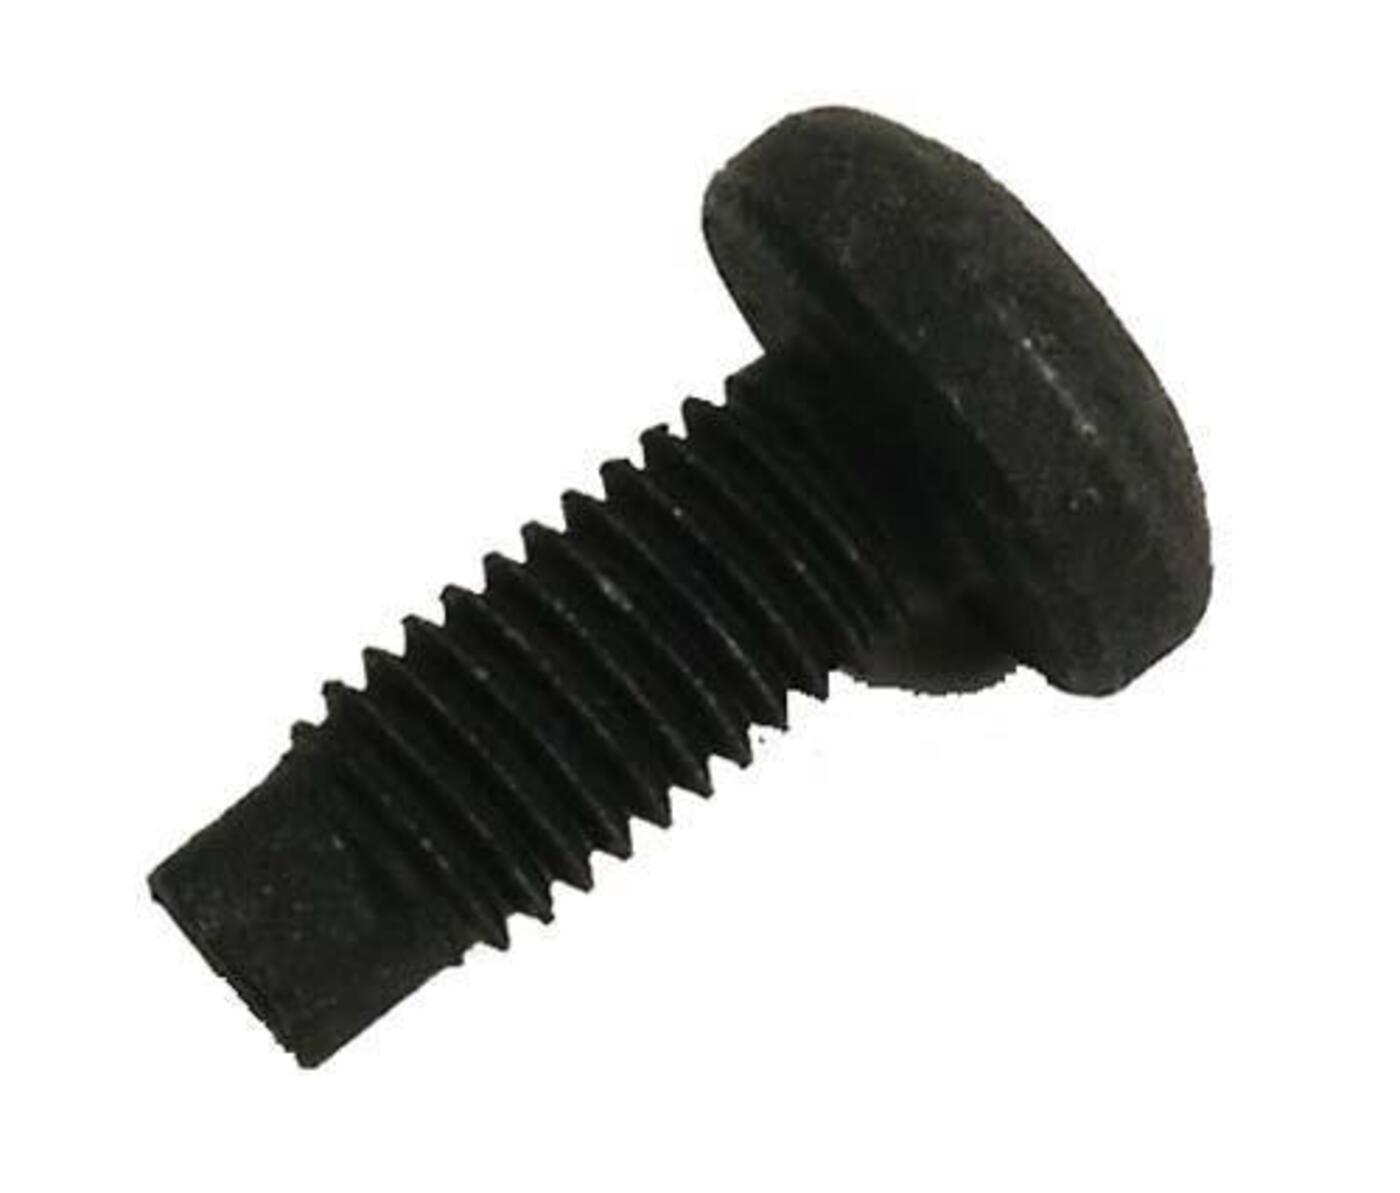 E-Z-GO RXV Metric Bolt for Seat Hinge (Years 2008-Up)